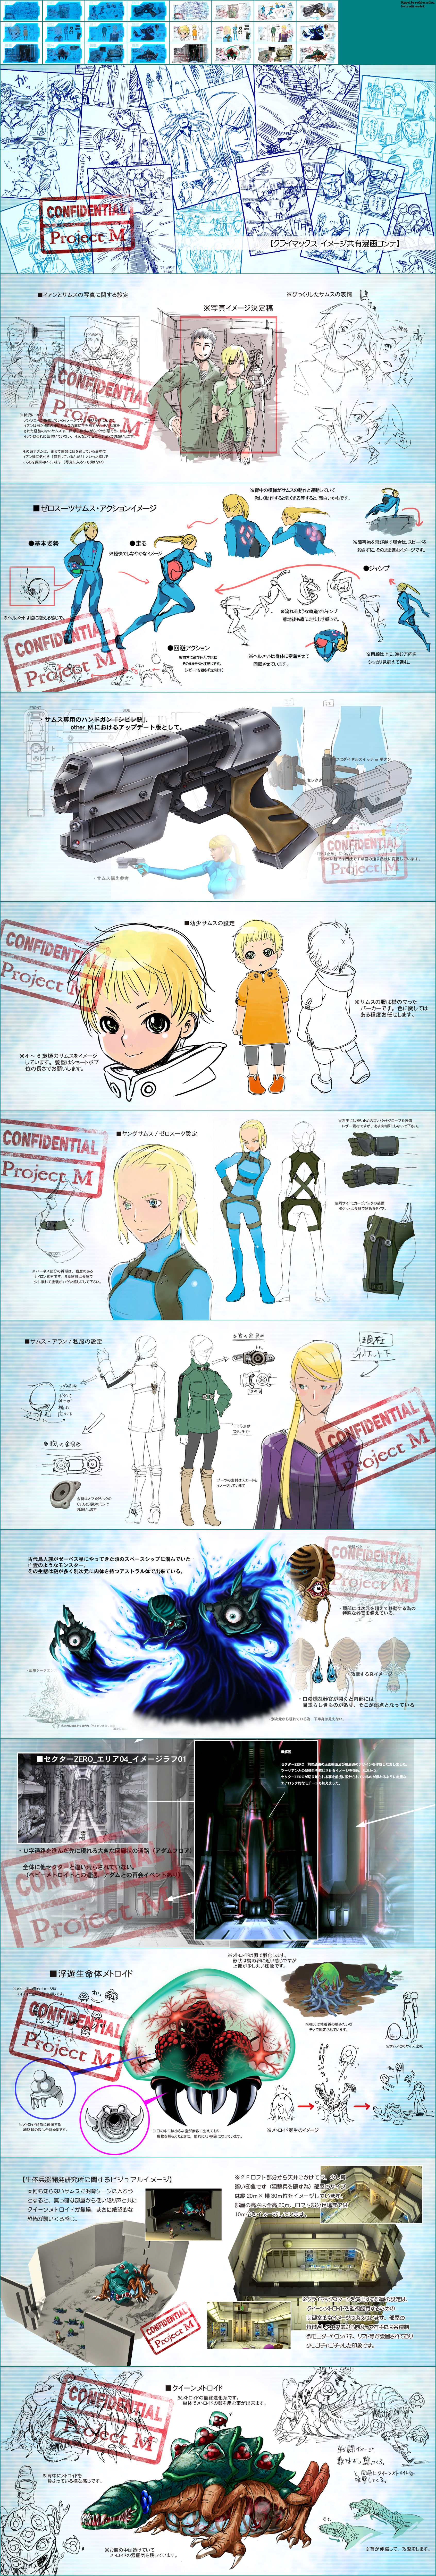 Metroid: Other M - Gallery (Page 8)